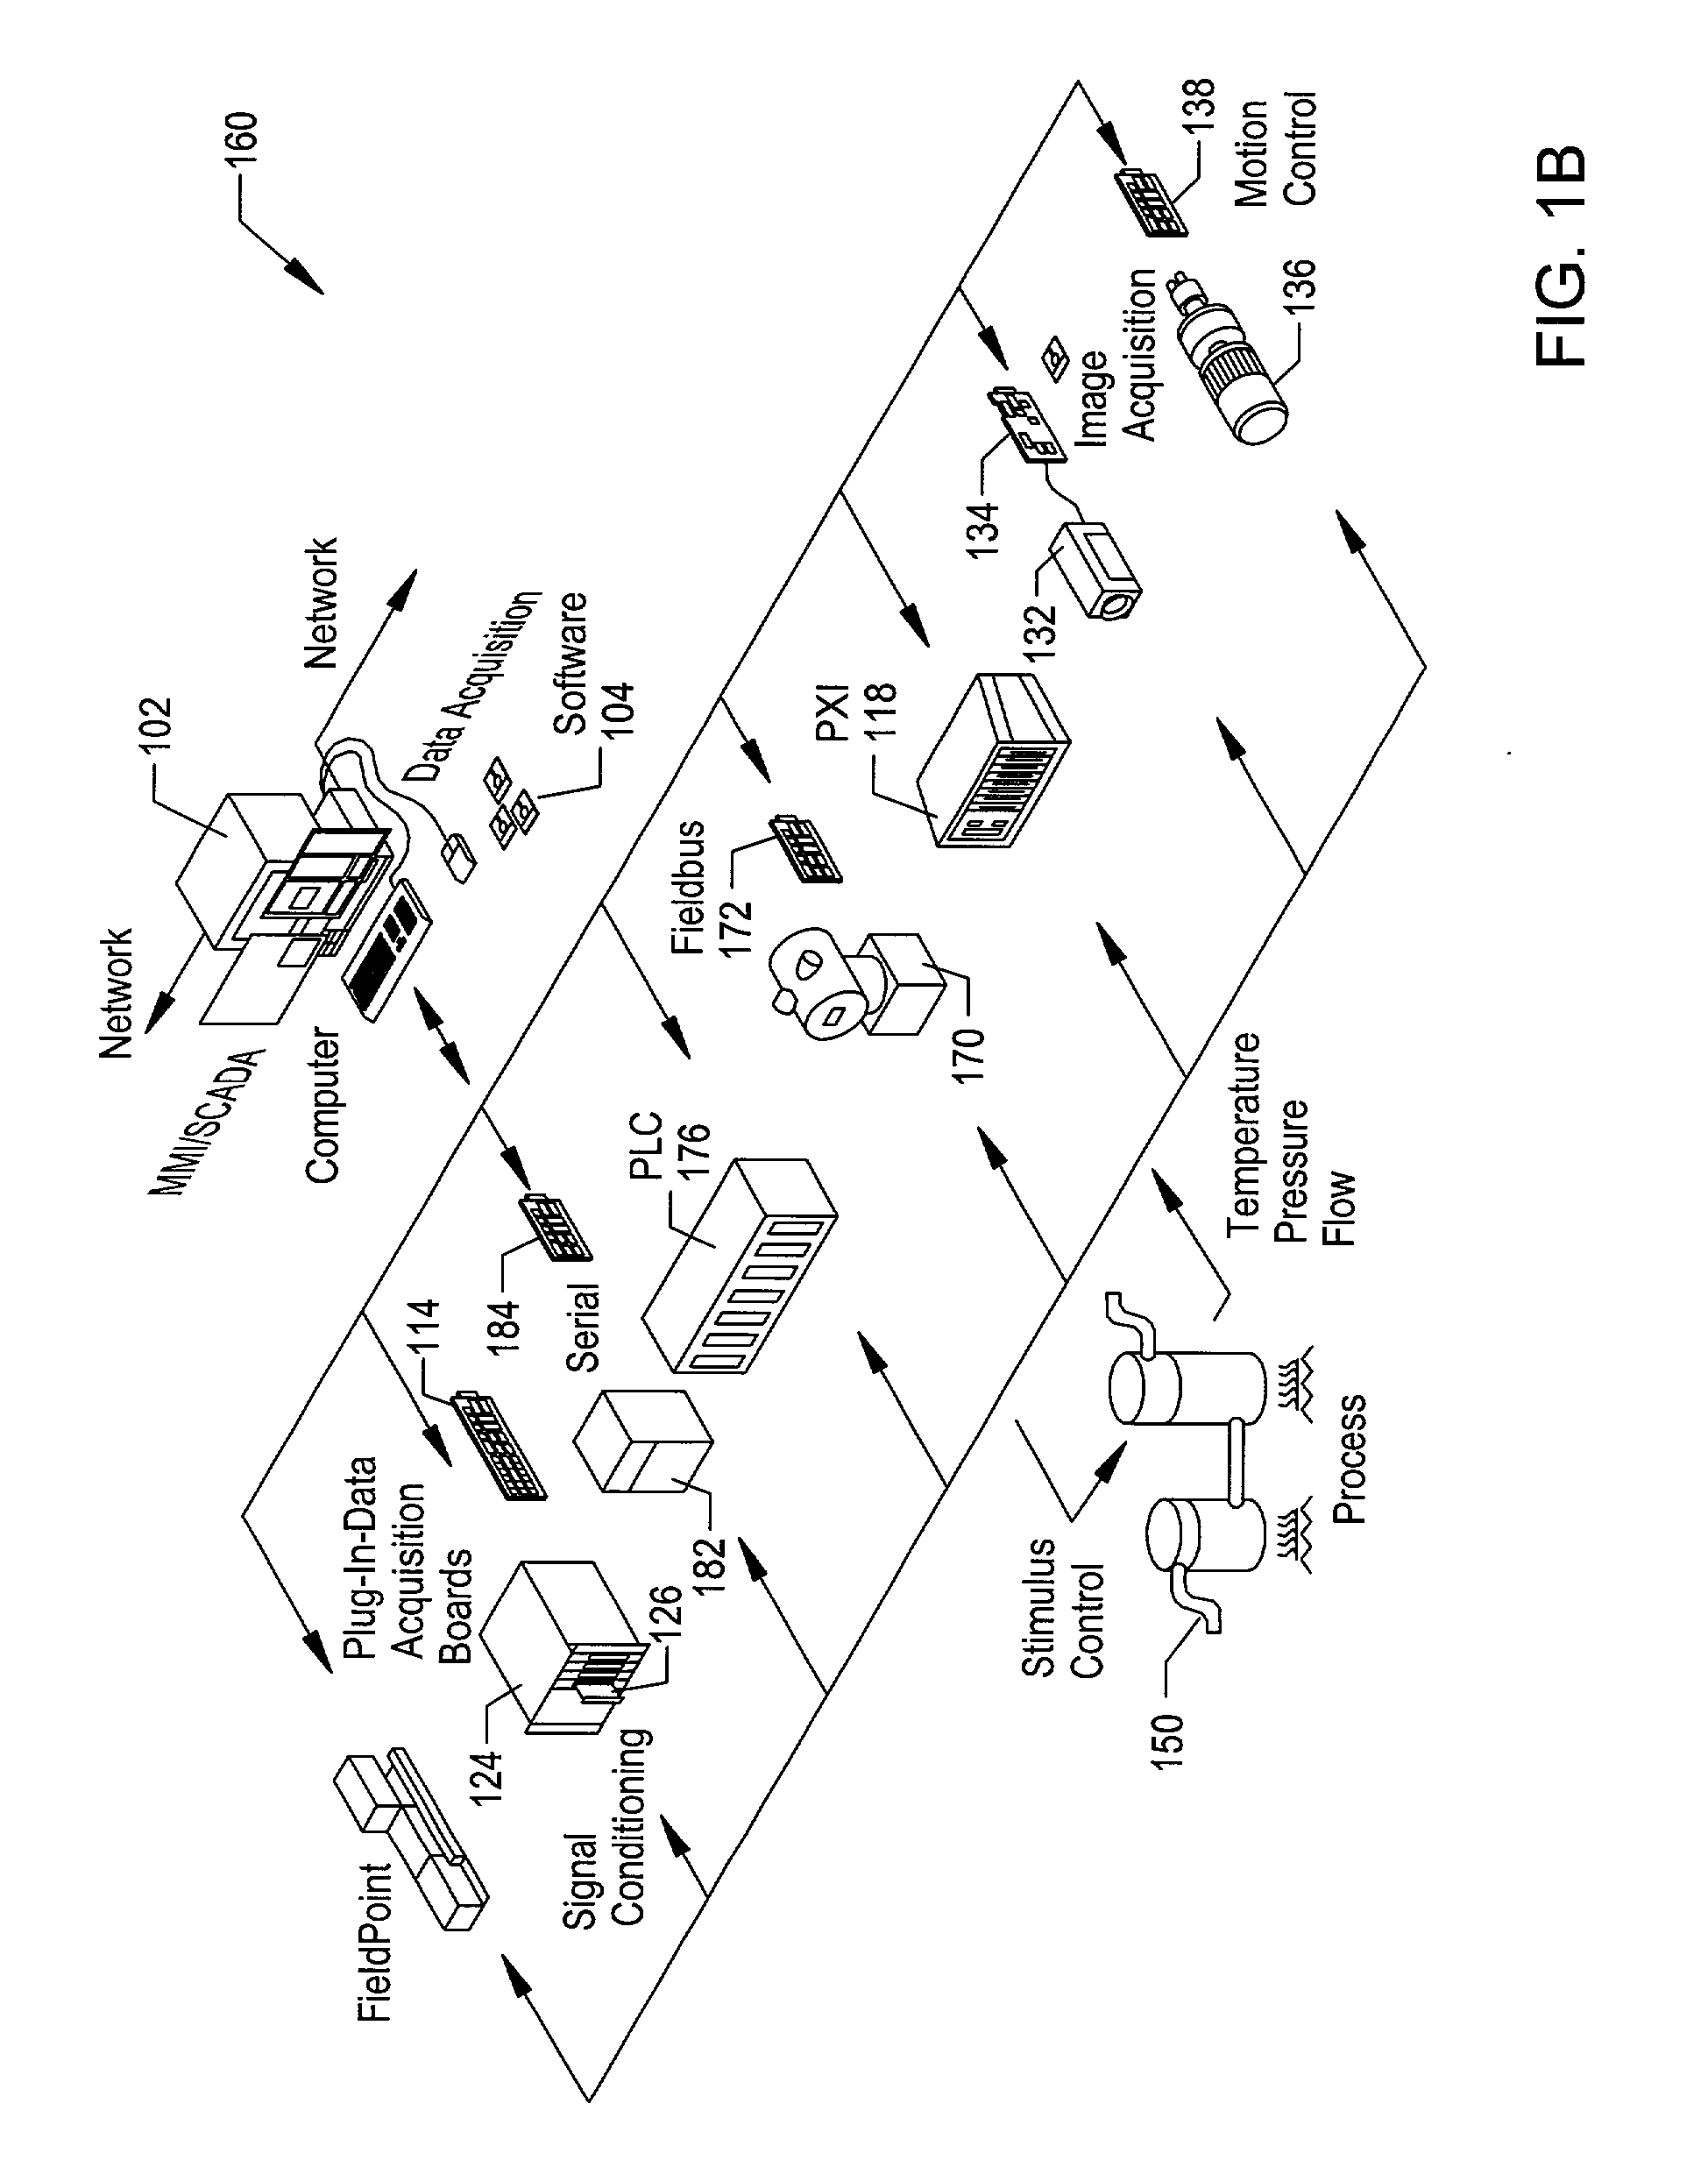 Graphical user interface including palette windows with an improved search function